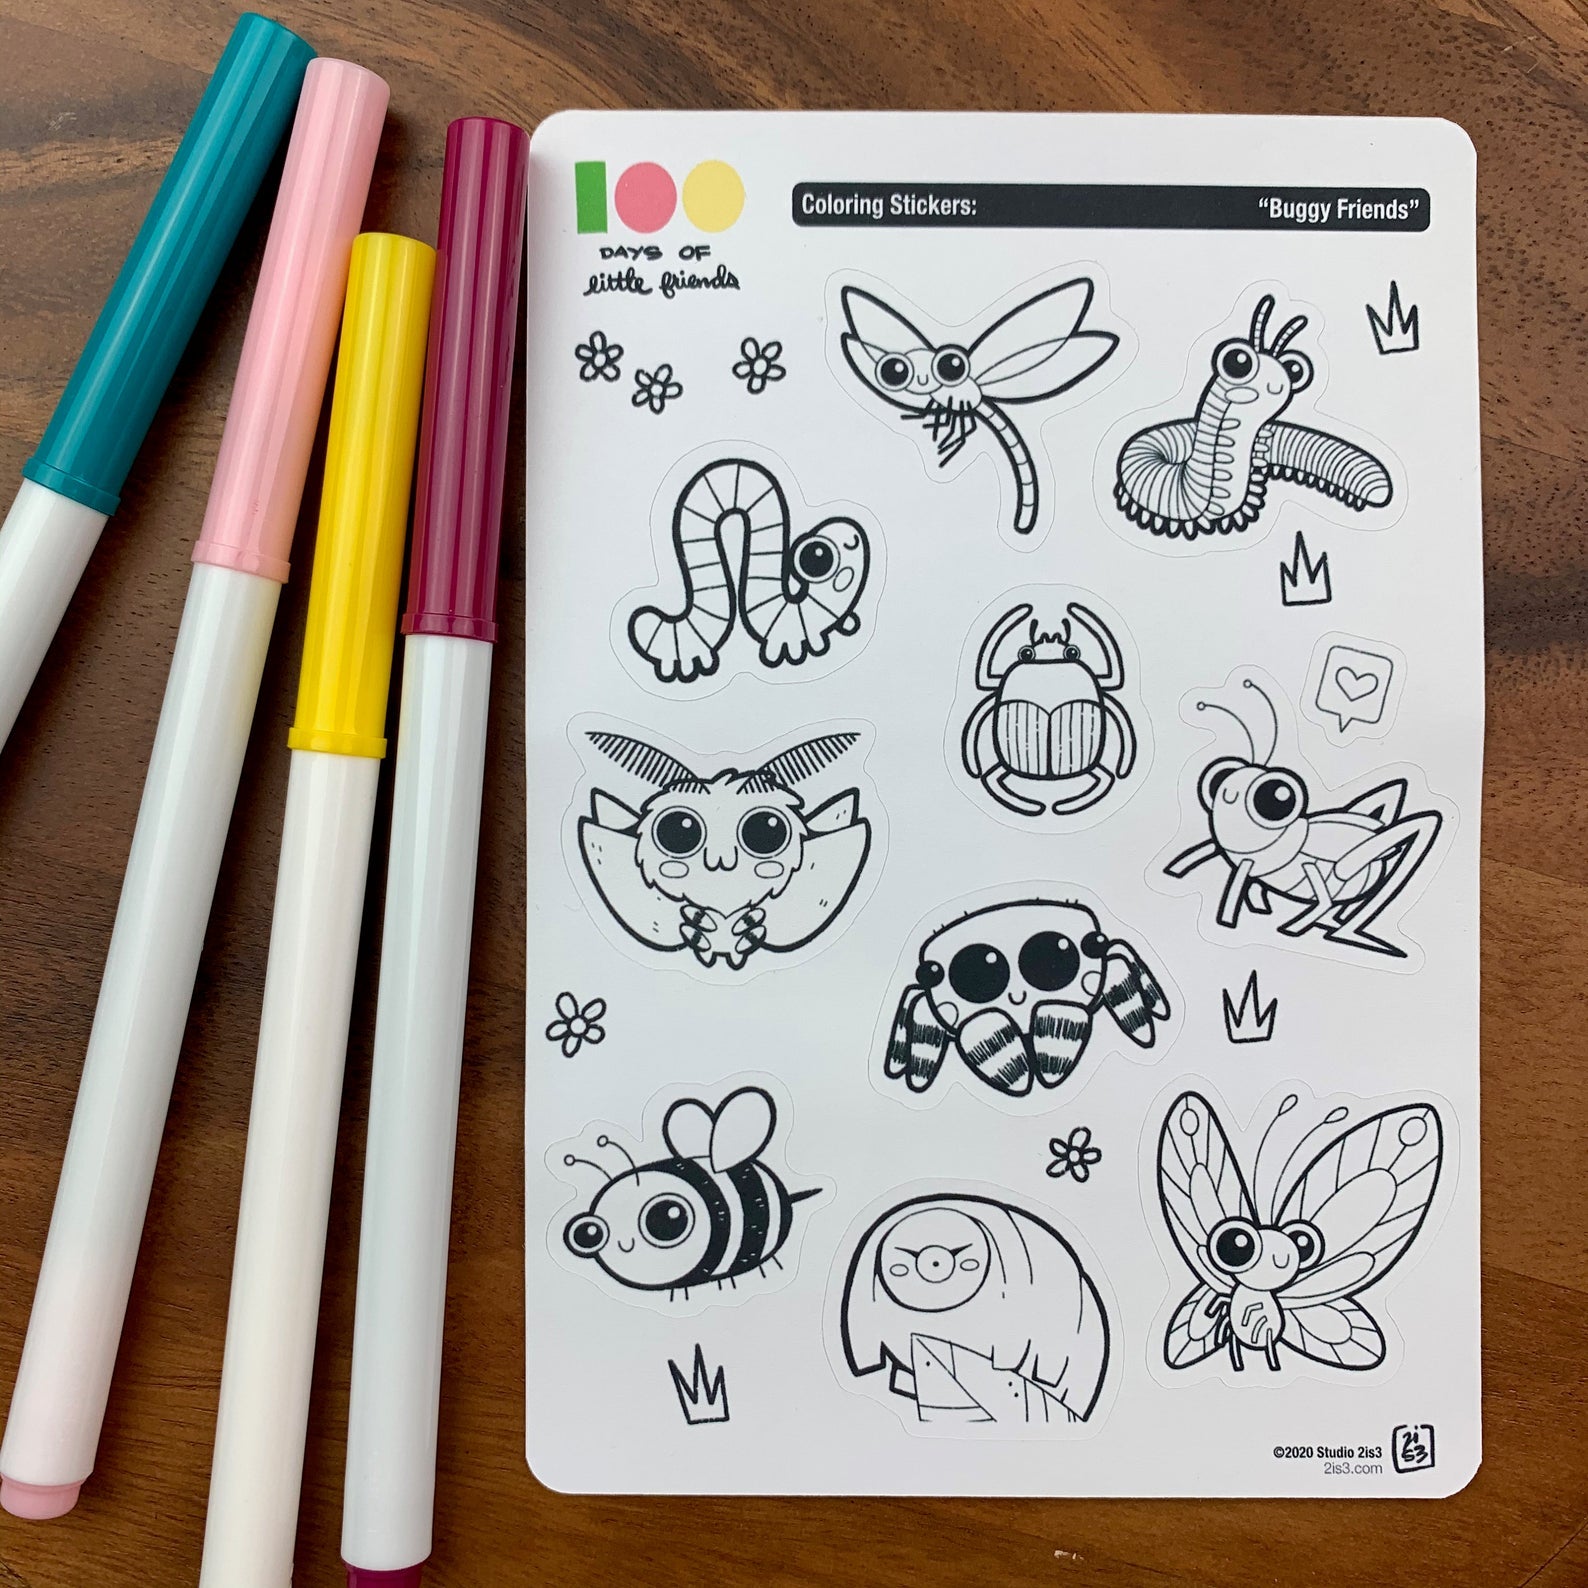 Markers and a sticker sheet with 10 little animal stickers on it. A Dragonfly, Millipede, Inchworm, Beetle, Moth, Spider, Grasshopper, Bee, Tardigrade, and Butterfly.